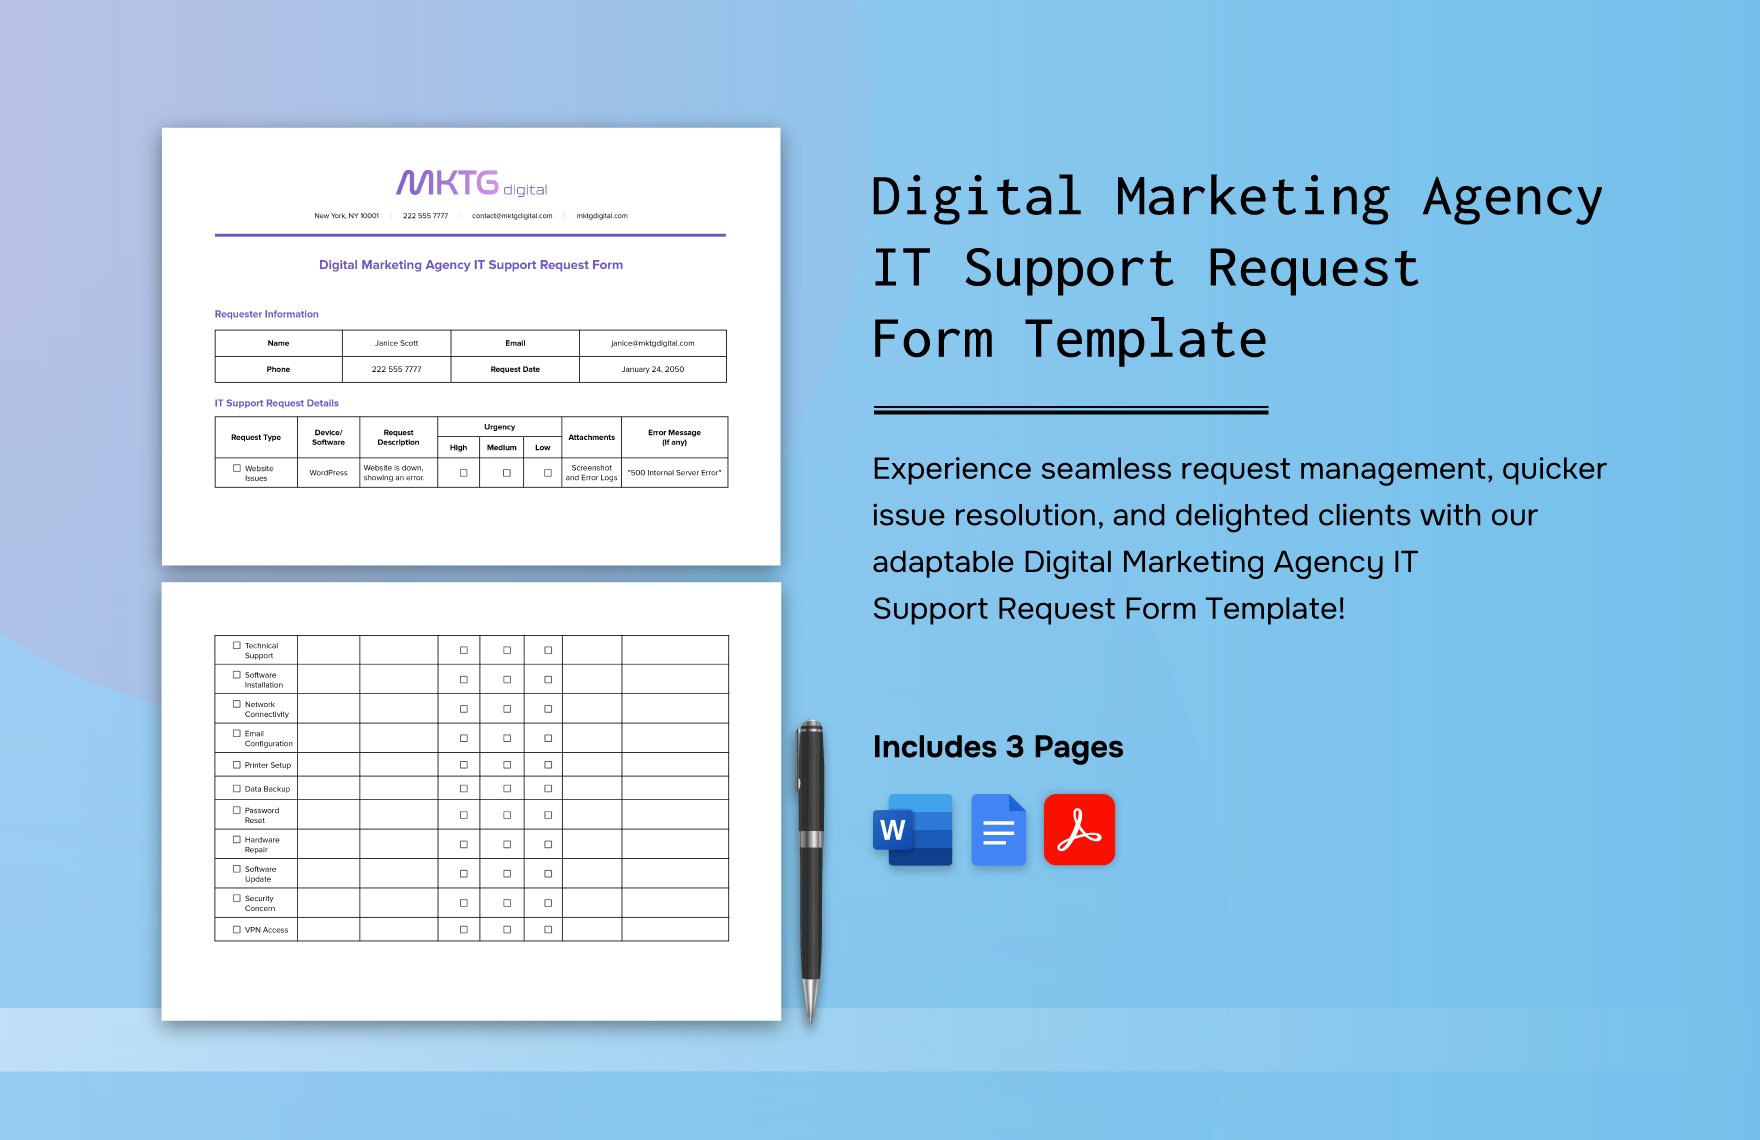 Digital Marketing Agency IT Support Request Form Template